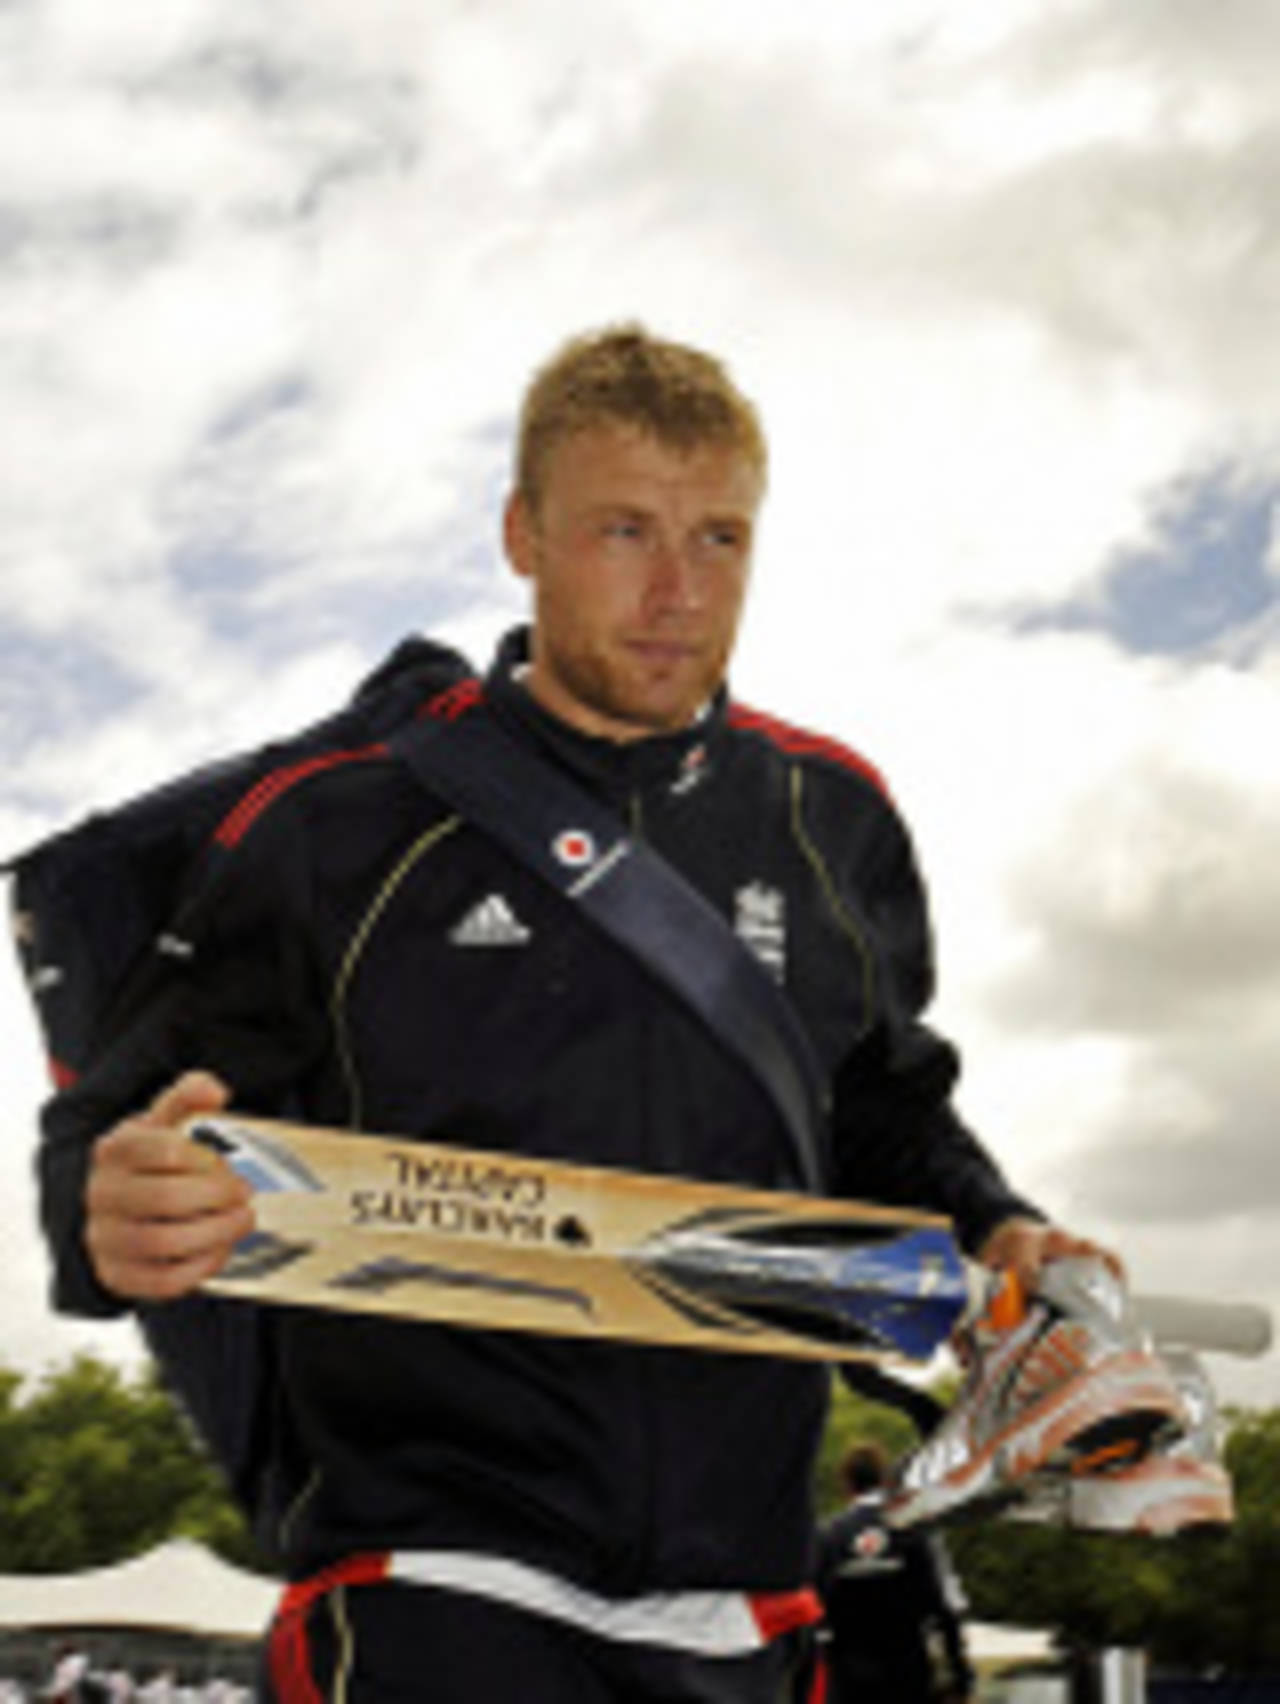 Andrew Flintoff heads back to the pavilion on the day he announced his retirement from Tests, Lord's, July 15, 2009